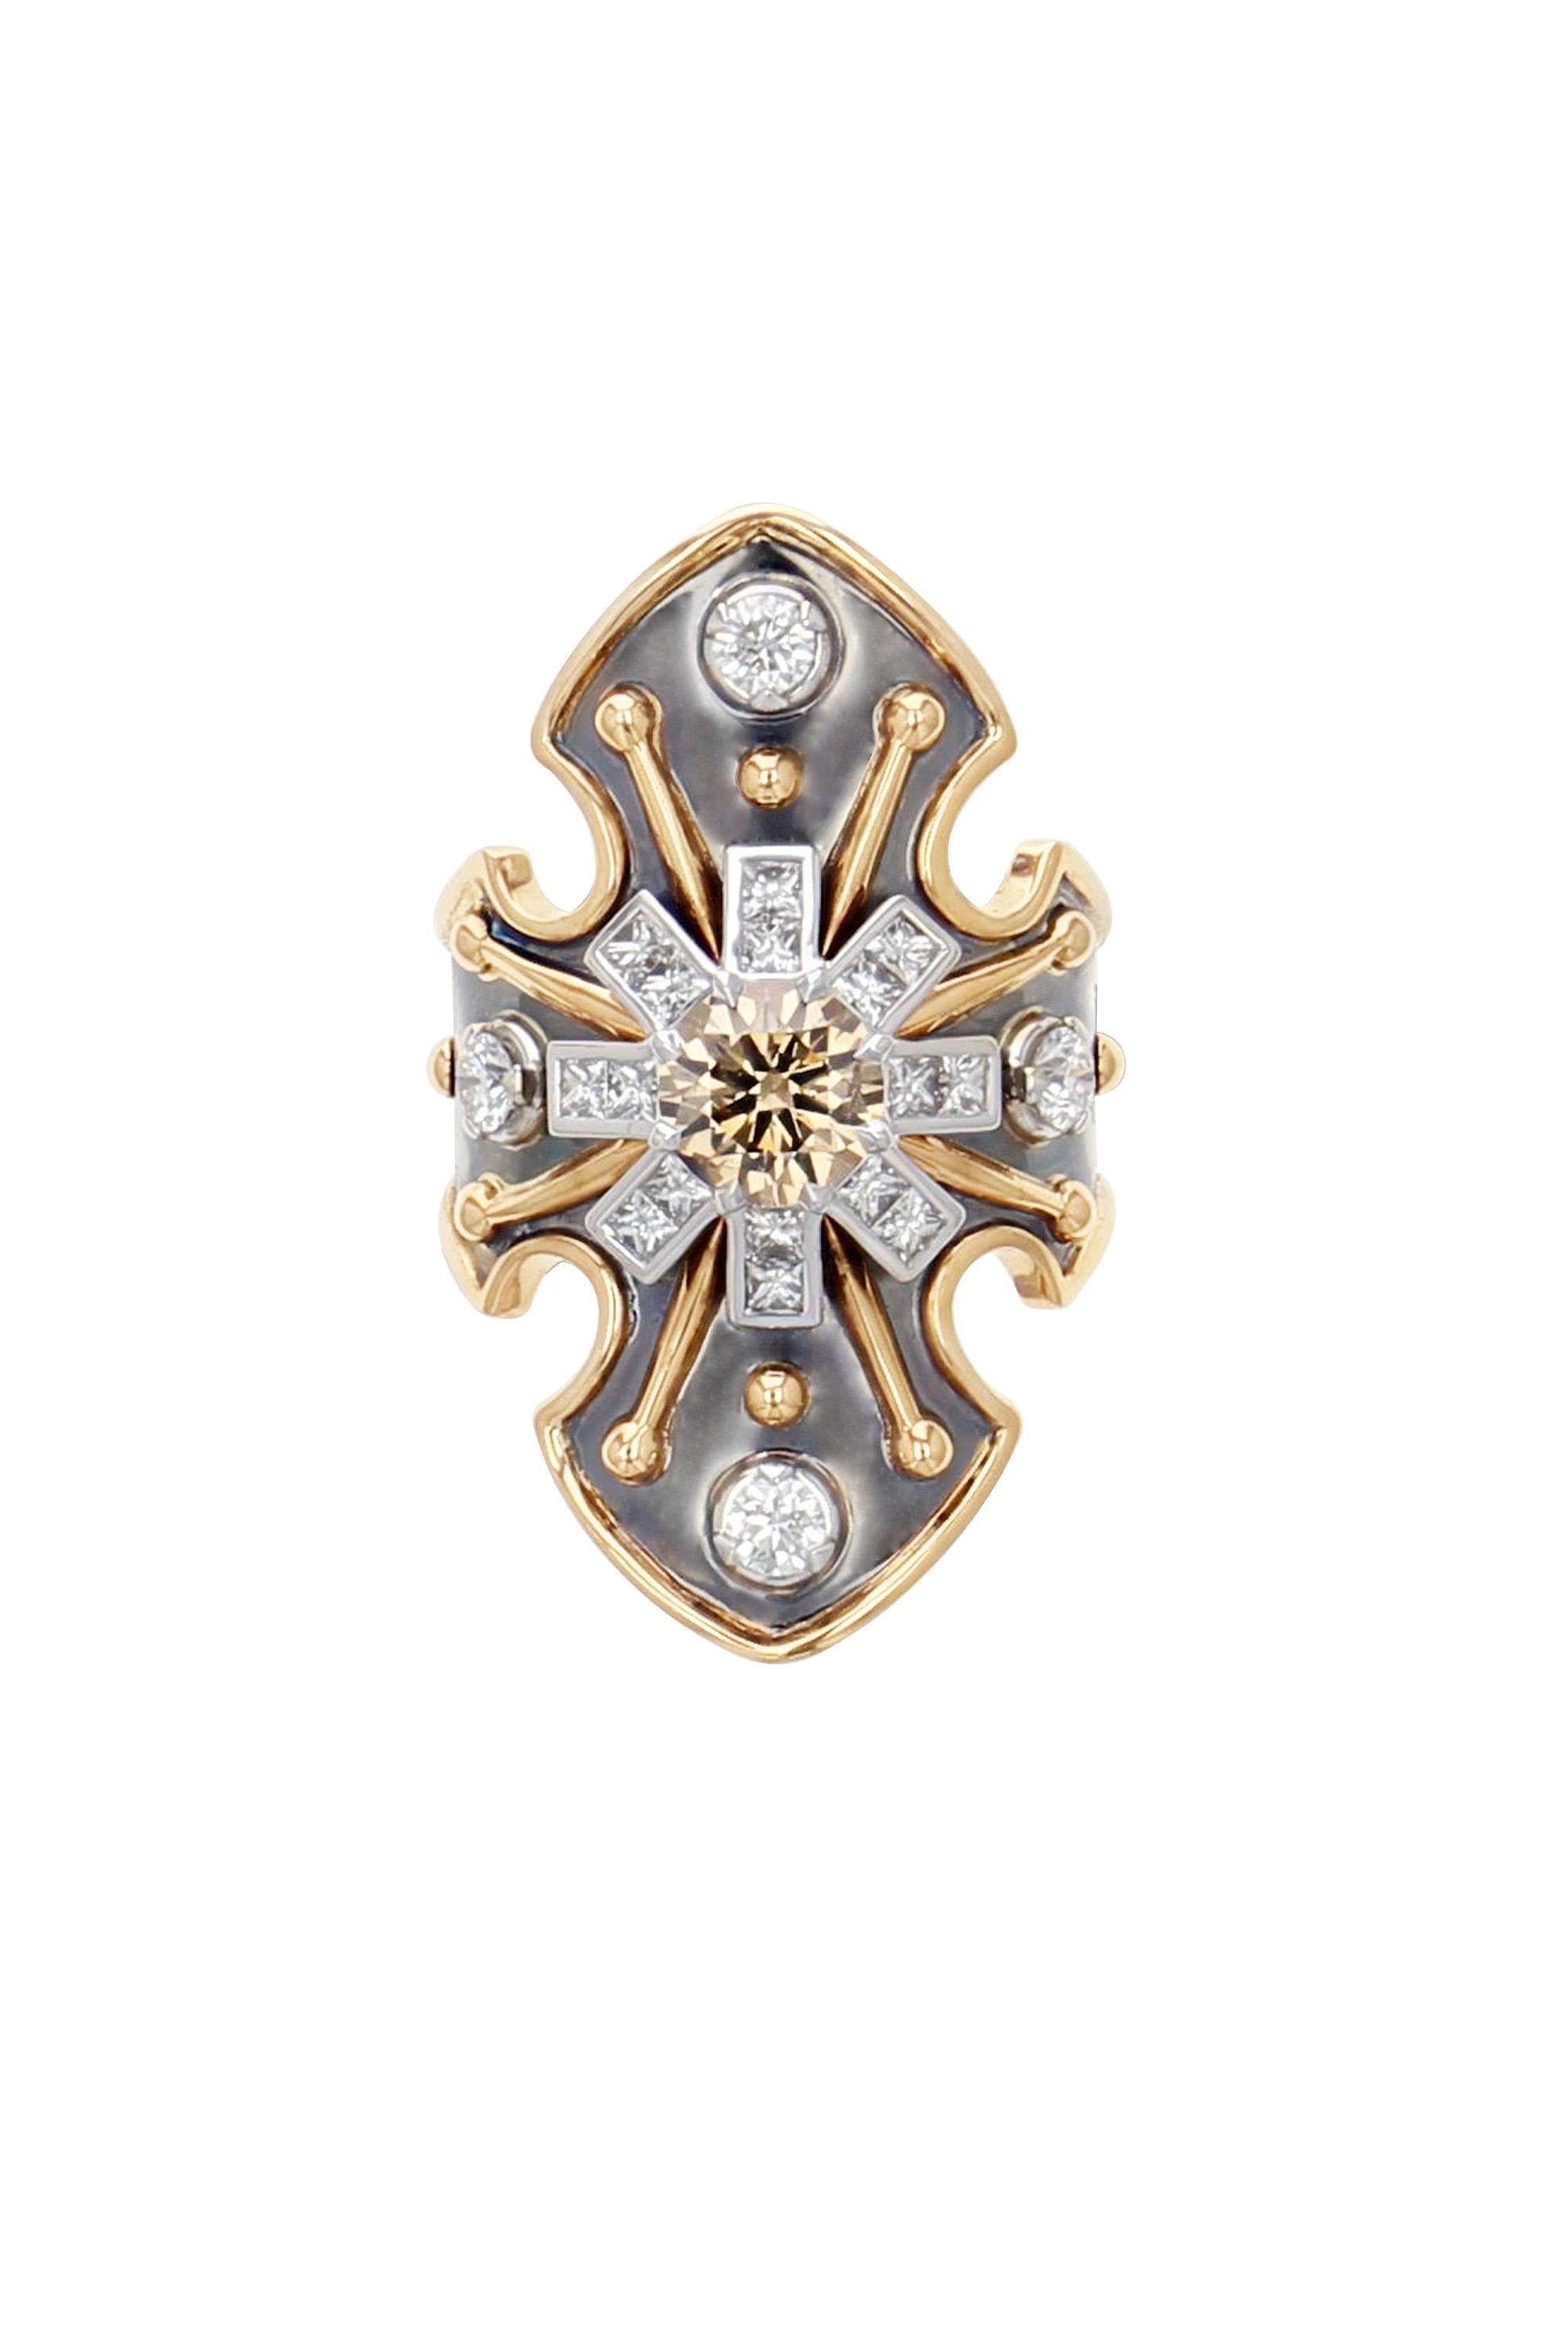 Yellow gold and distressed silver ring studded with a round brown diamond surrounded by diamonds and set on a white gold star.

Details:
Brown Diamond: 1.12 cts  
Diamonds: 0.94 cts
18k Yellow & White  Gold: 6.32g 
Distressed Silver: 6g  
Made in